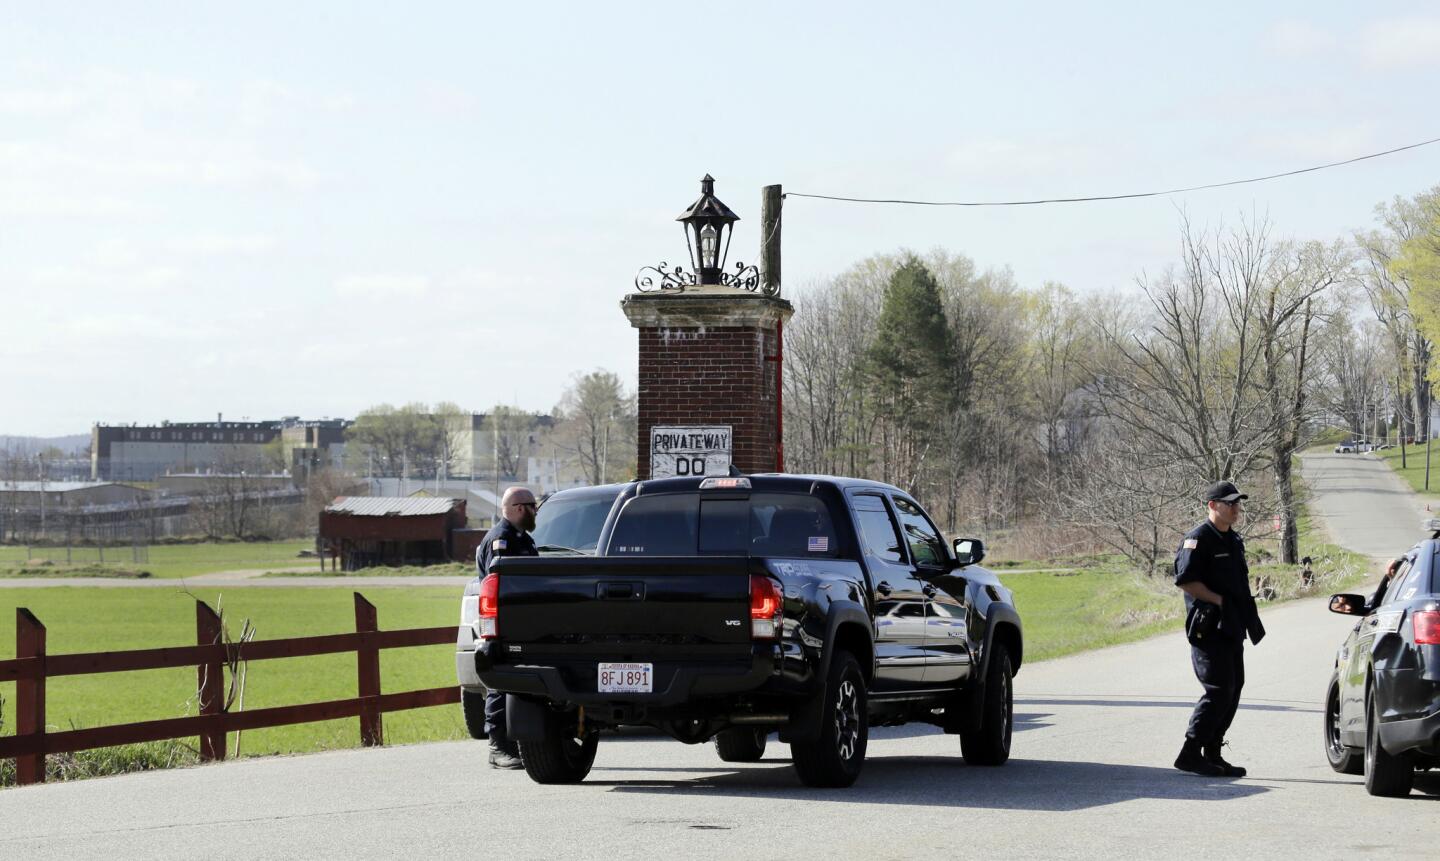 Police guard an entrance to the Souza-Baranowski Correctional Center, Wednesday, April 19, 2017, in Shirley, Mass. Former NFL star Aaron Hernandez, who was serving a life sentence for a murder conviction and just days ago was acquitted of a double murder, died after hanging himself at his prison cell early Wednesday, Massachusetts prisons officials said.